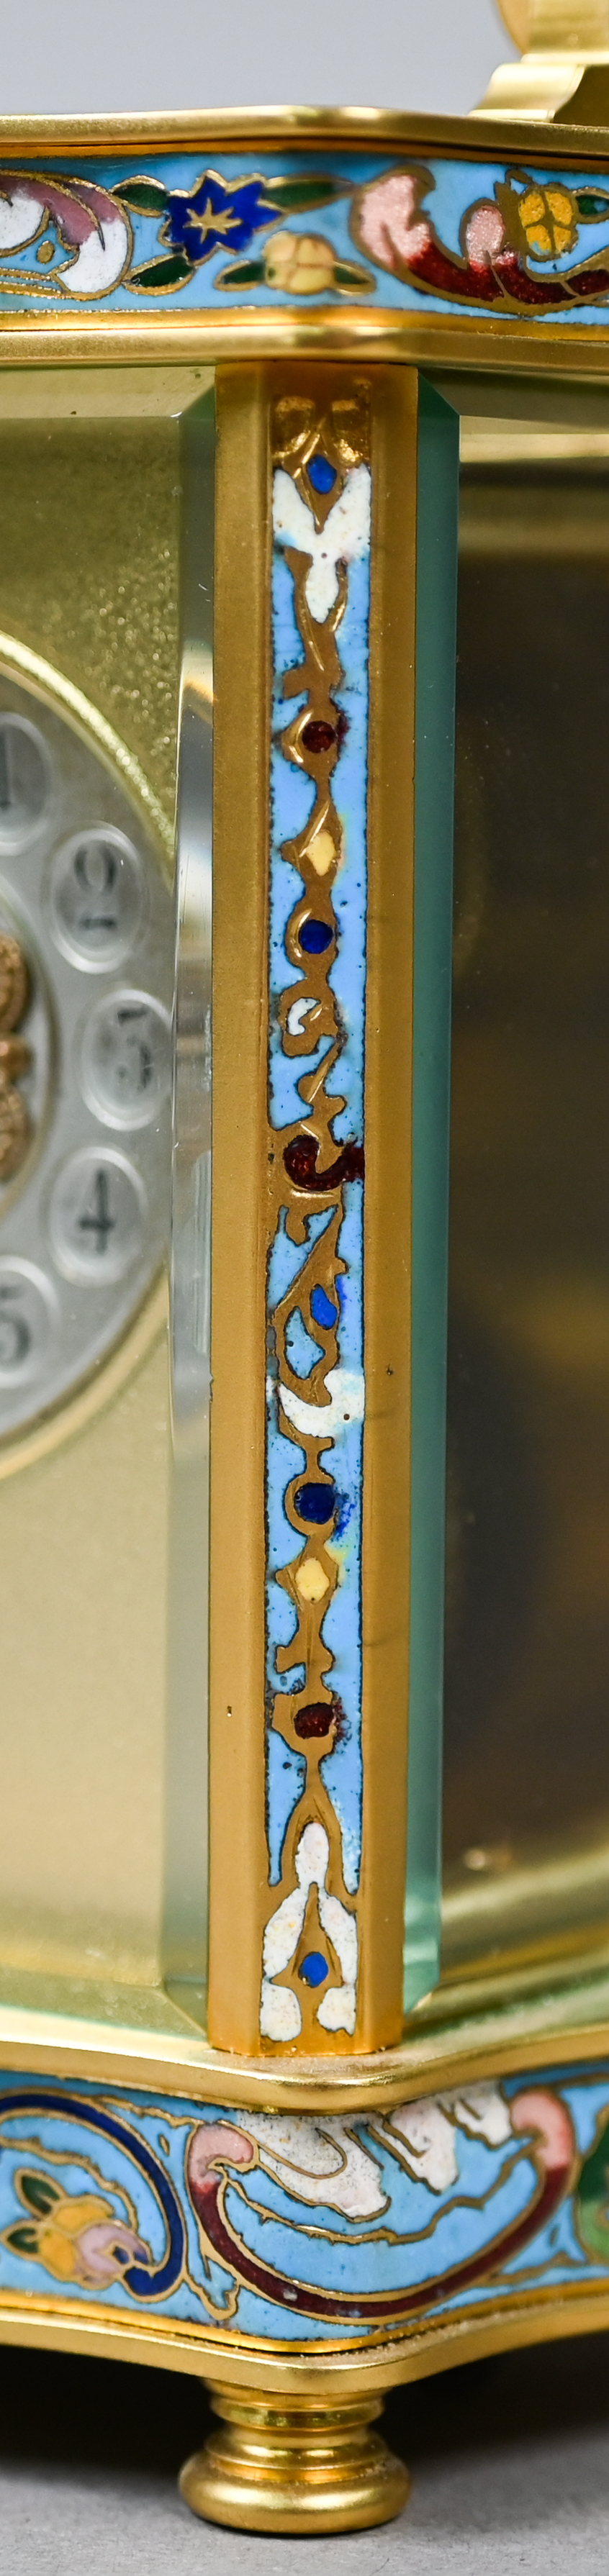 A French cloisonné panelled gilt carriage clock with single drum movement, 13.5 cm high - Image 2 of 7